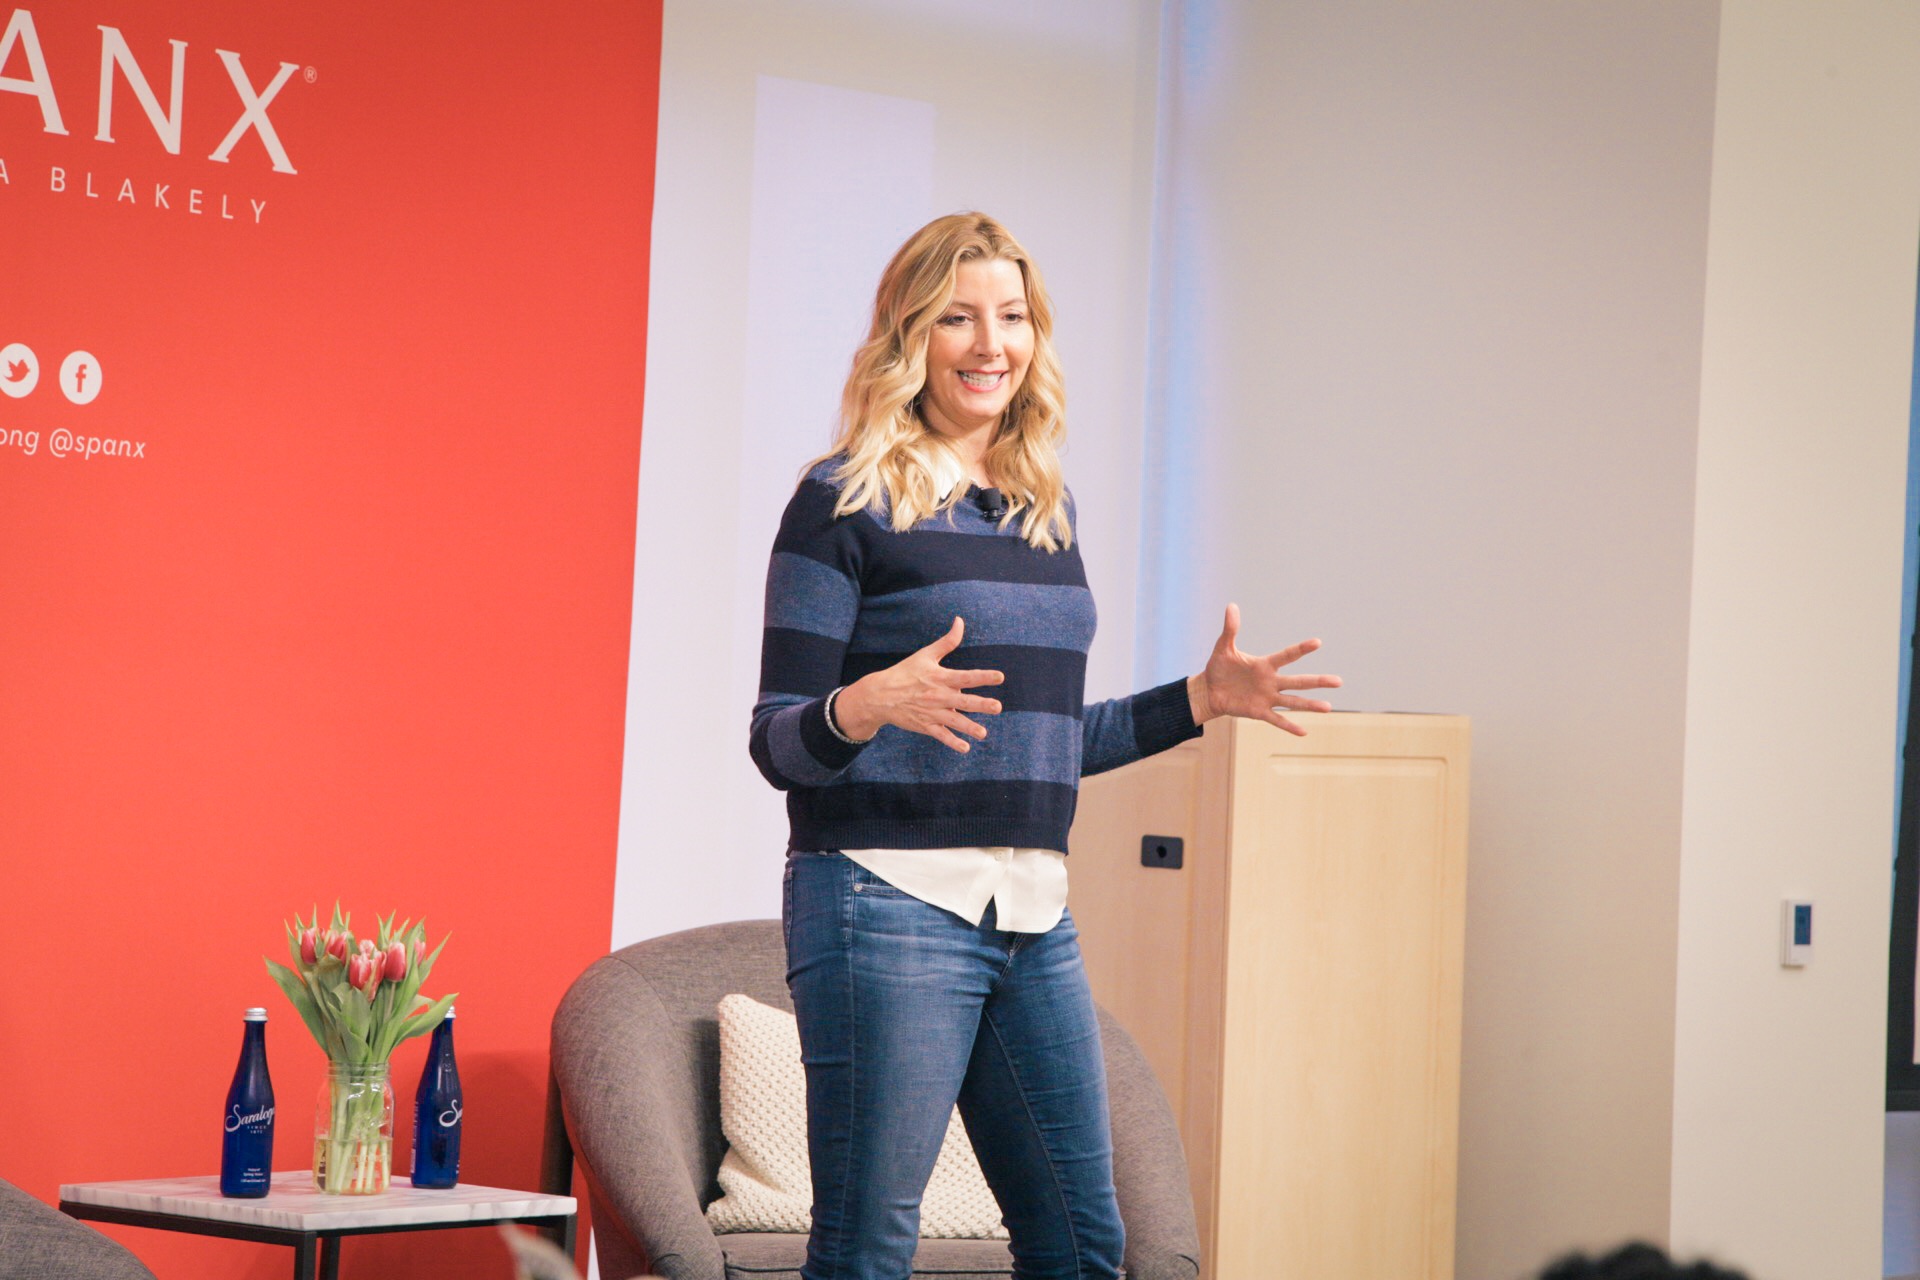 Spanx founder, Sara Blakely, provides money and mentoring to 10